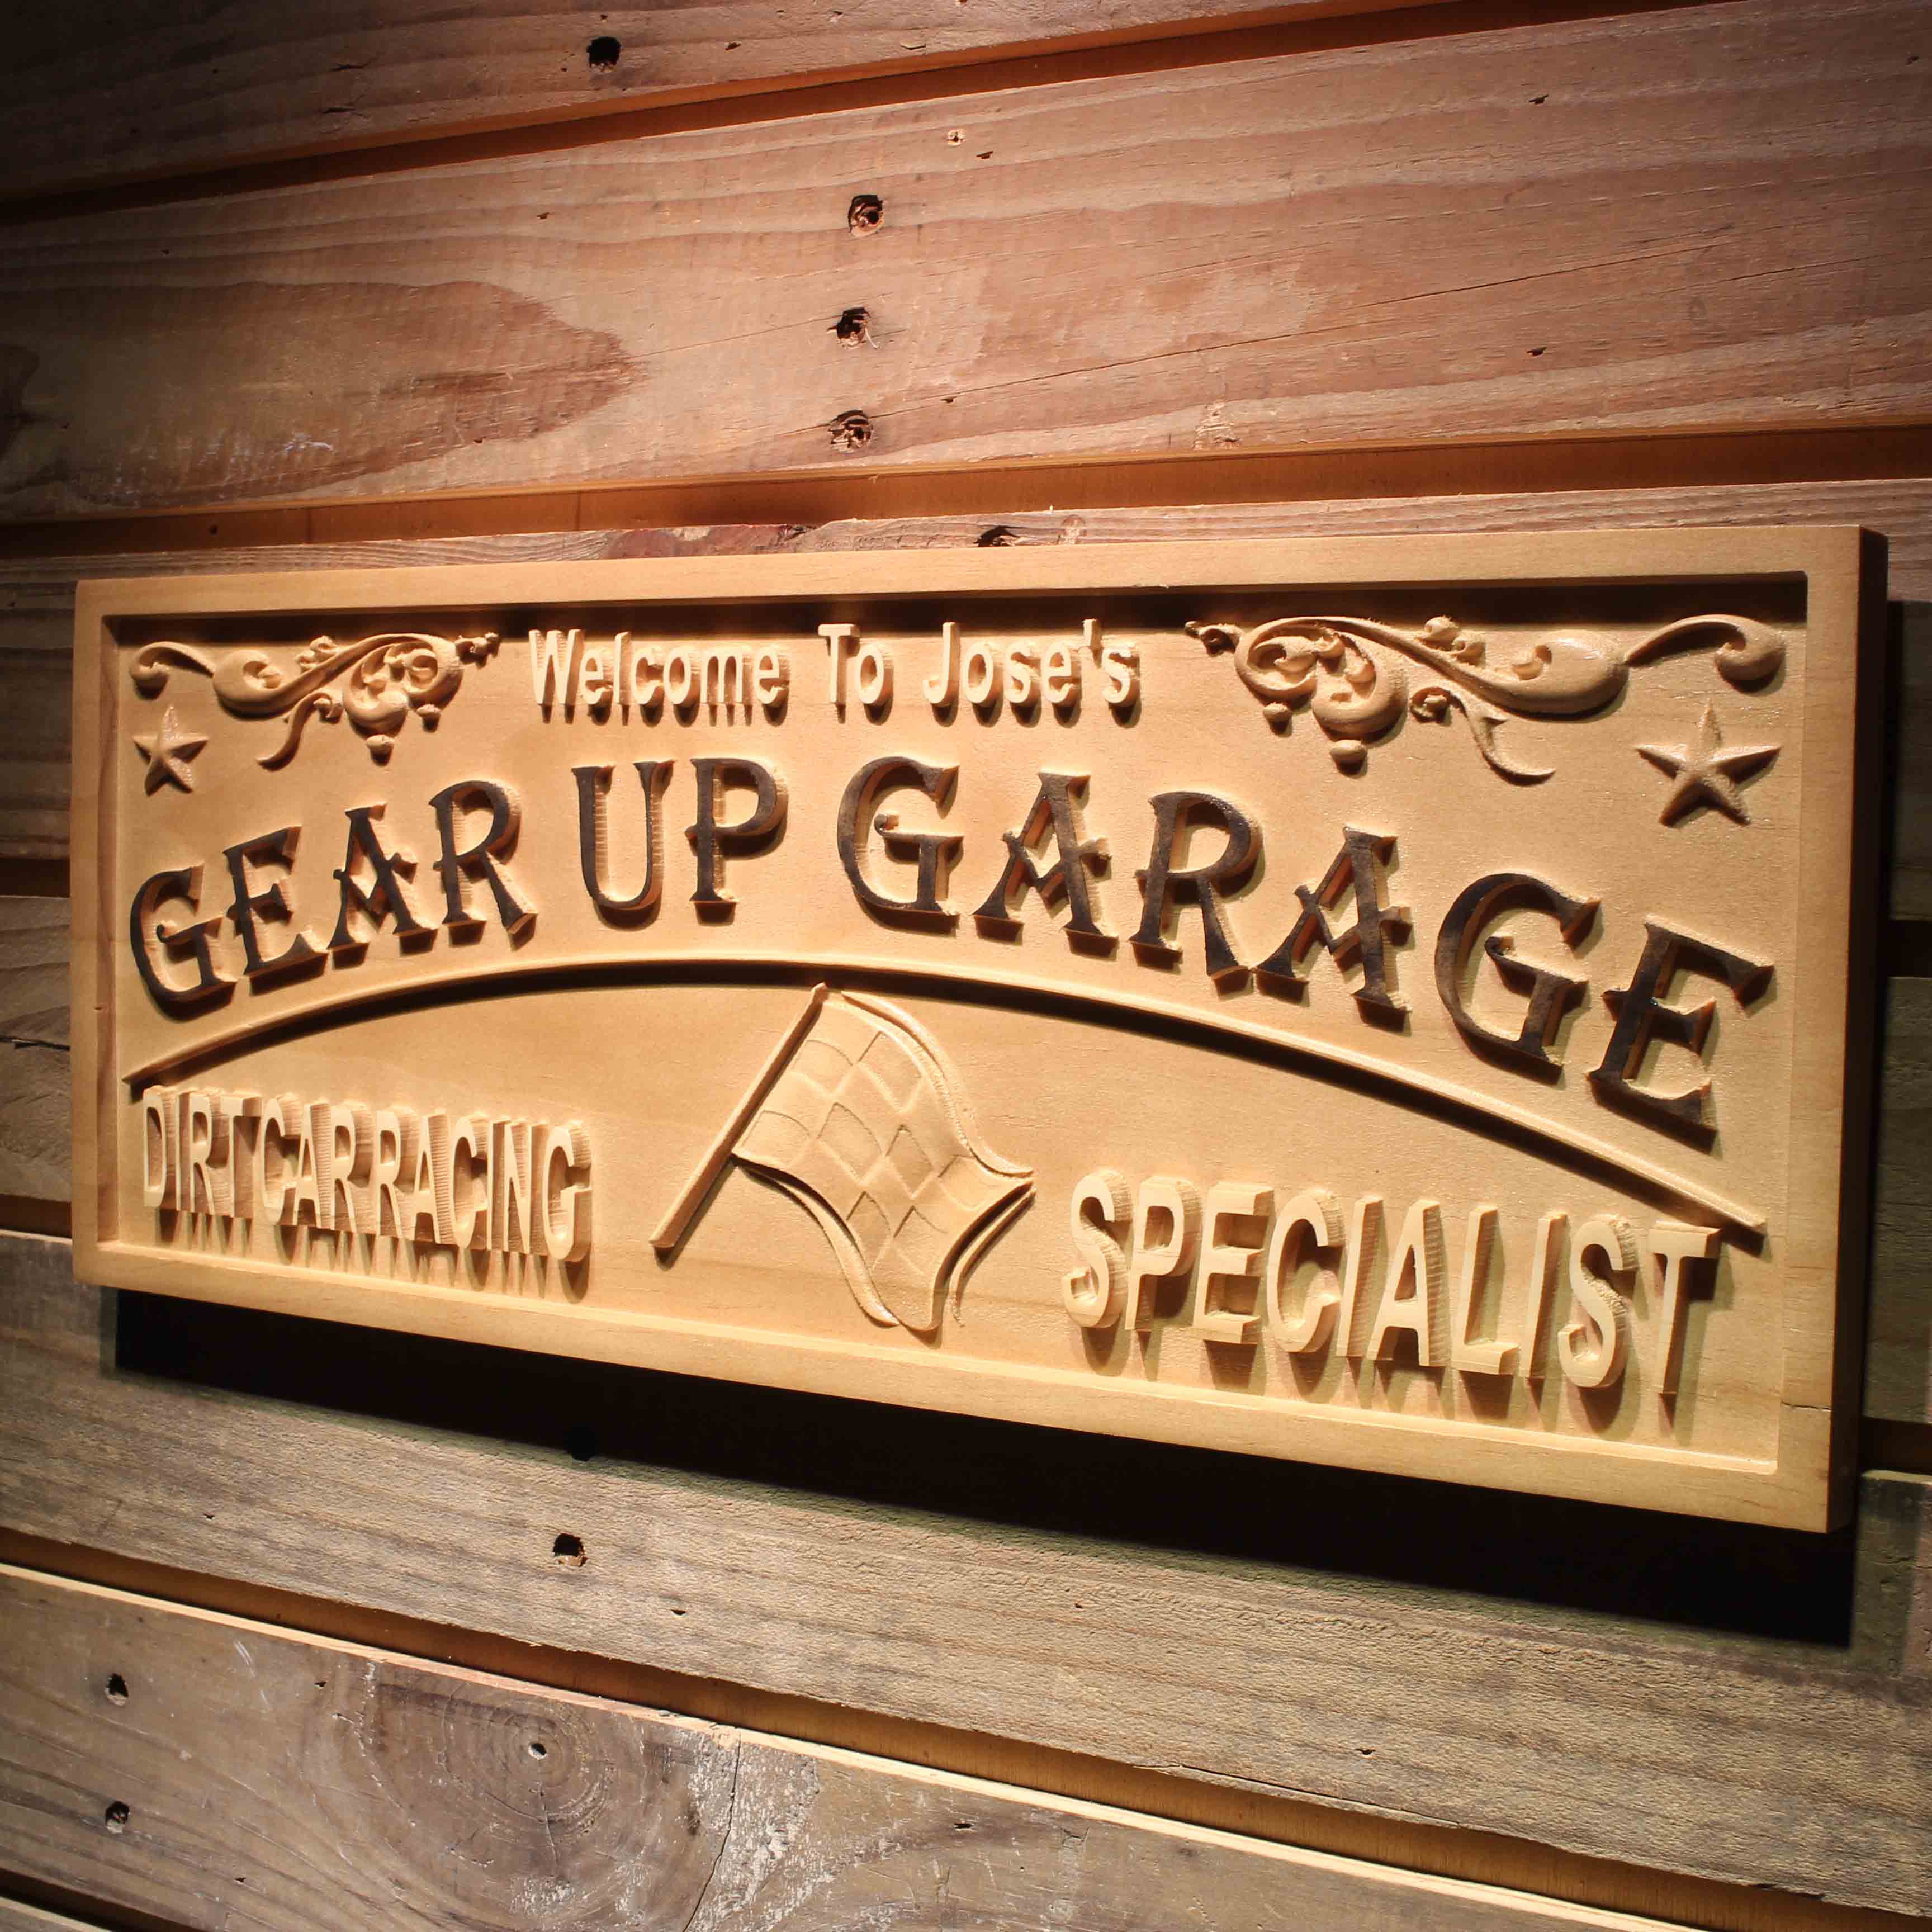 Personalized Gear Up Garage Dirt Car Racing Car Park Décor Bar Beer Wood Engraved Wooden Sign